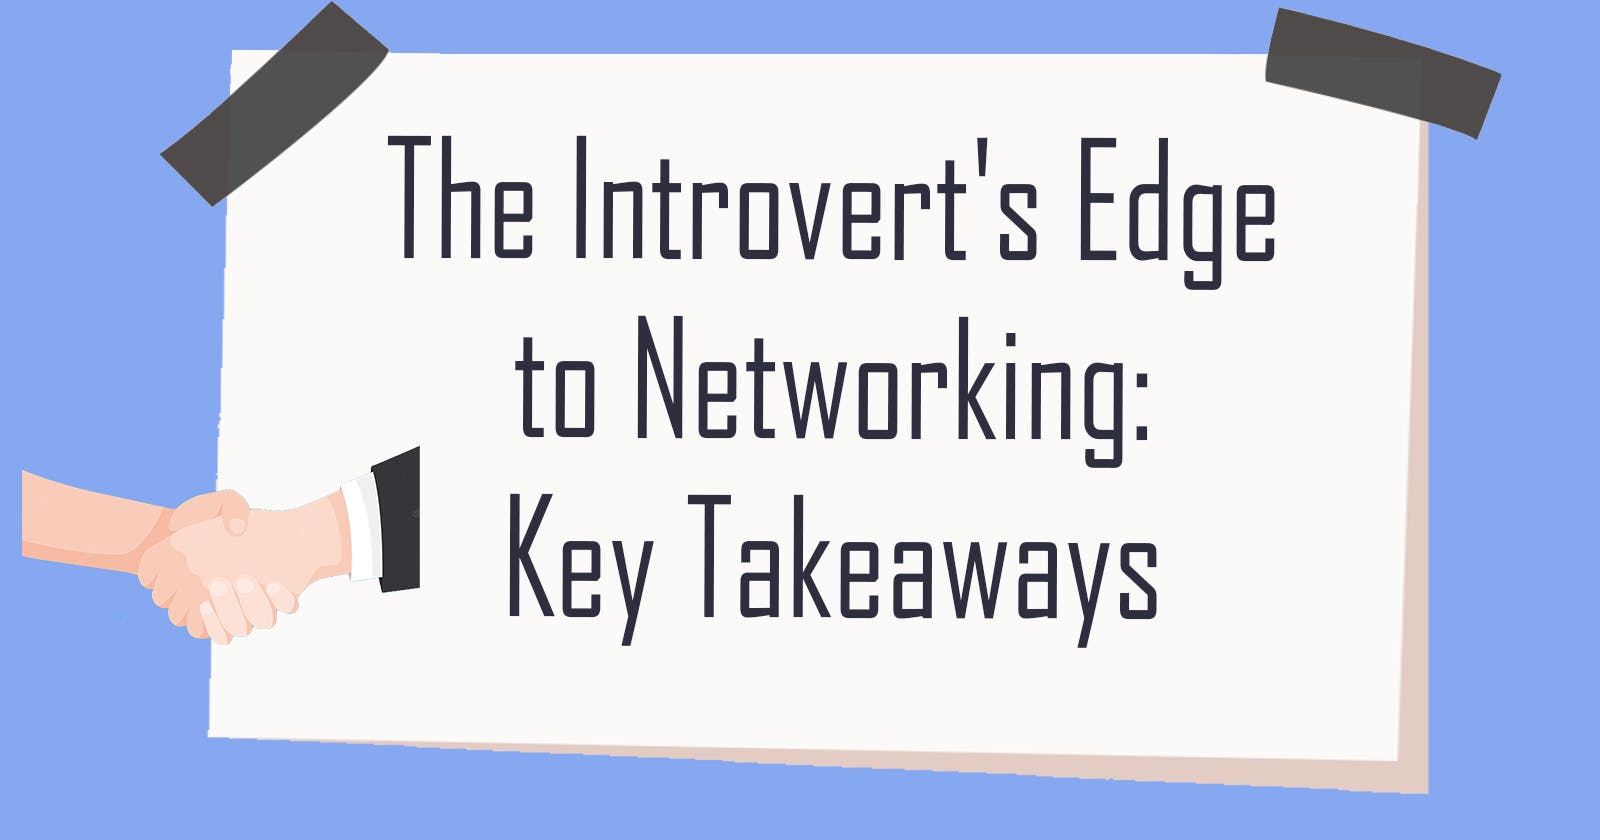 The Introvert's Edge to Networking: Key Takeaways